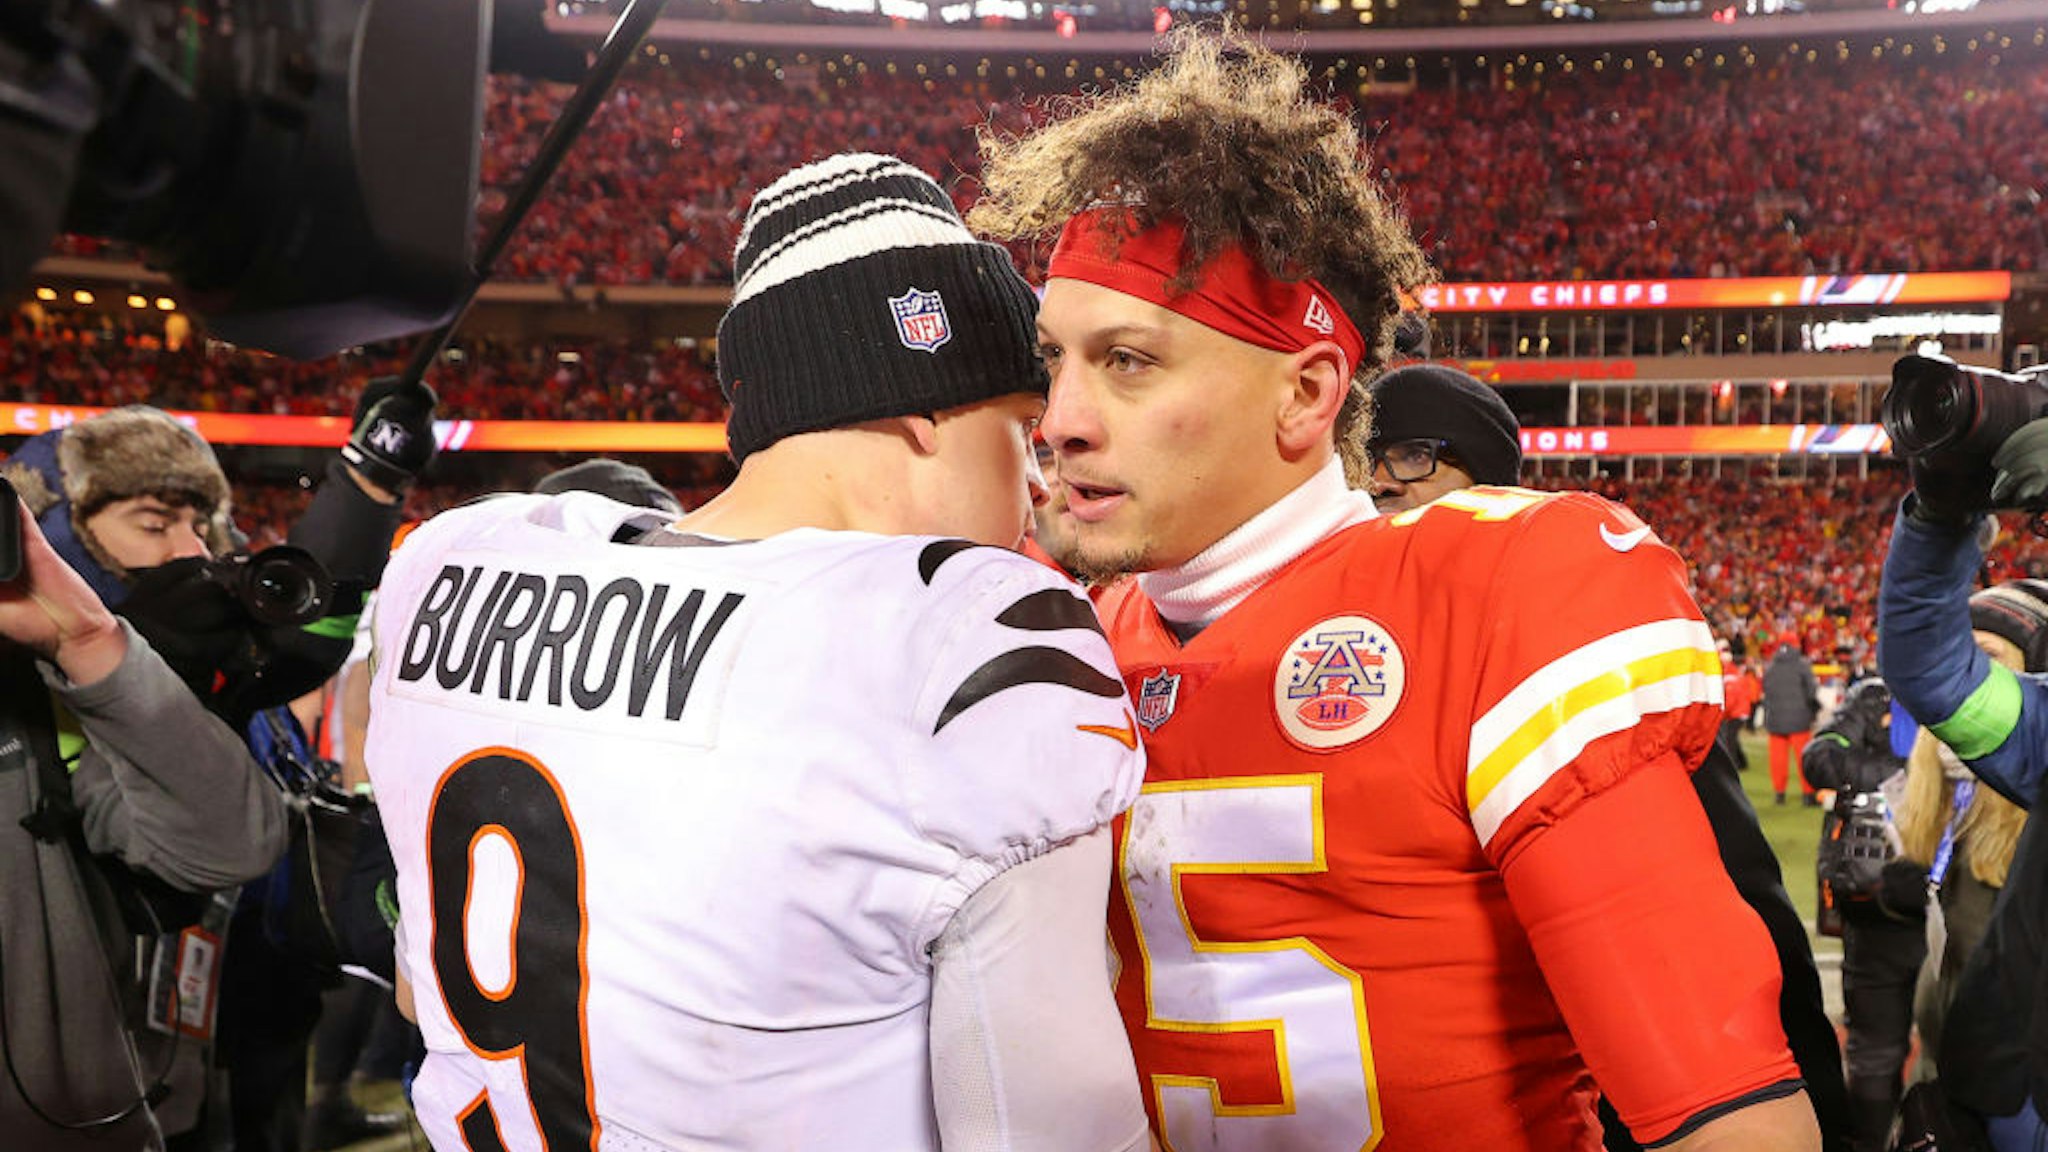 KANSAS CITY, MISSOURI - JANUARY 29: Joe Burrow #9 of the Cincinnati Bengals and Patrick Mahomes #15 of the Kansas City Chiefs meet on the field after the AFC Championship Game at GEHA Field at Arrowhead Stadium on January 29, 2023 in Kansas City, Missouri. (Photo by Kevin C. Cox/Getty Images)